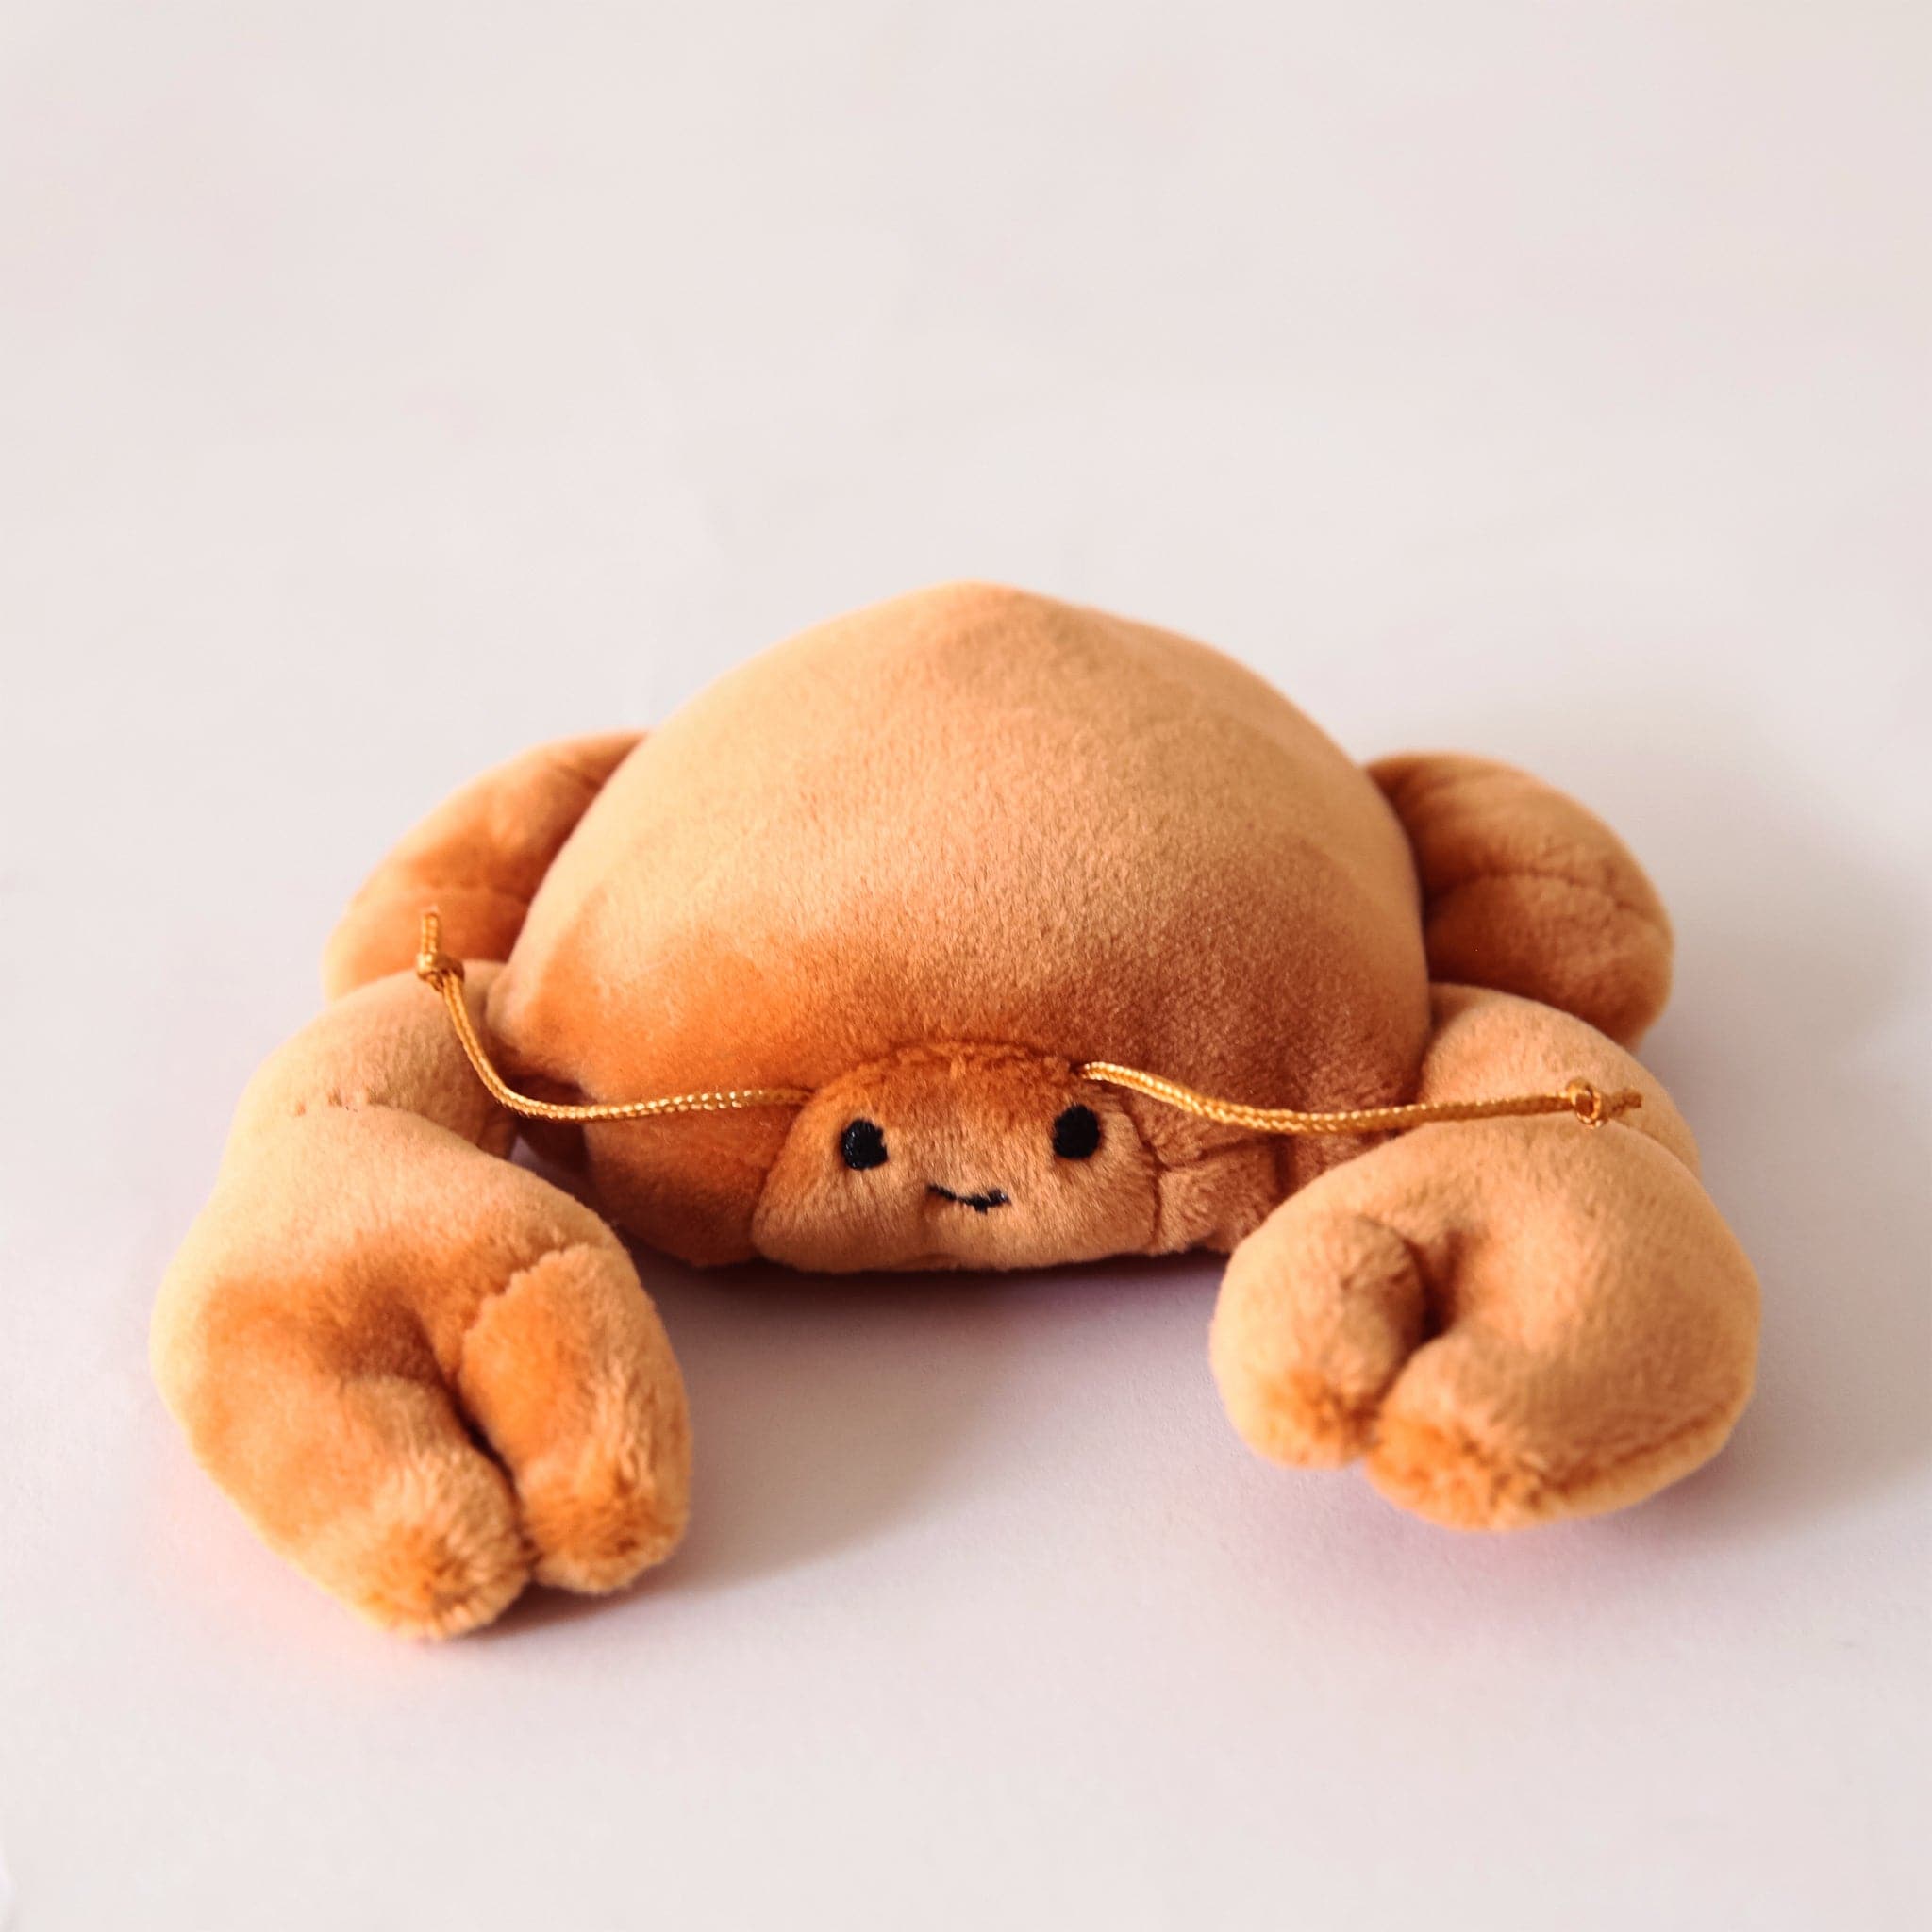 In front of a cream background is a stuffed orange crab laying on its stomach. It has two large claws in the front. On its face are two black eyes and a little black smile. He has two orange antennas above his eyes. 